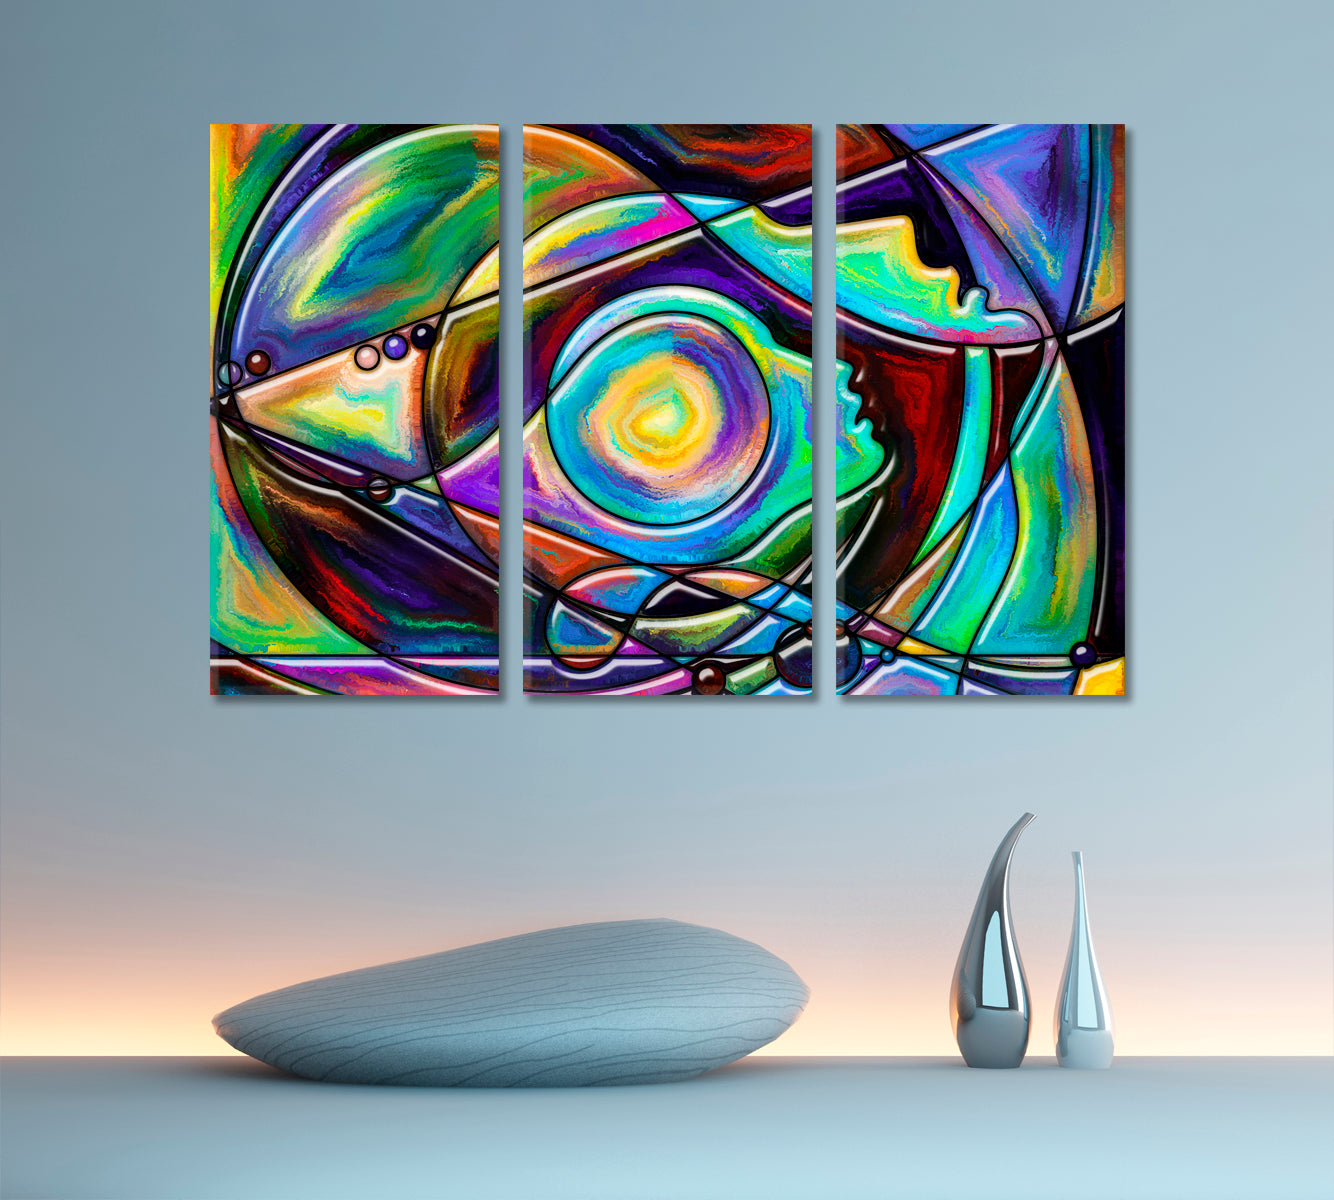 Double Ego Abstraction Abstract Art Print Artesty 3 panels 36" x 24" 